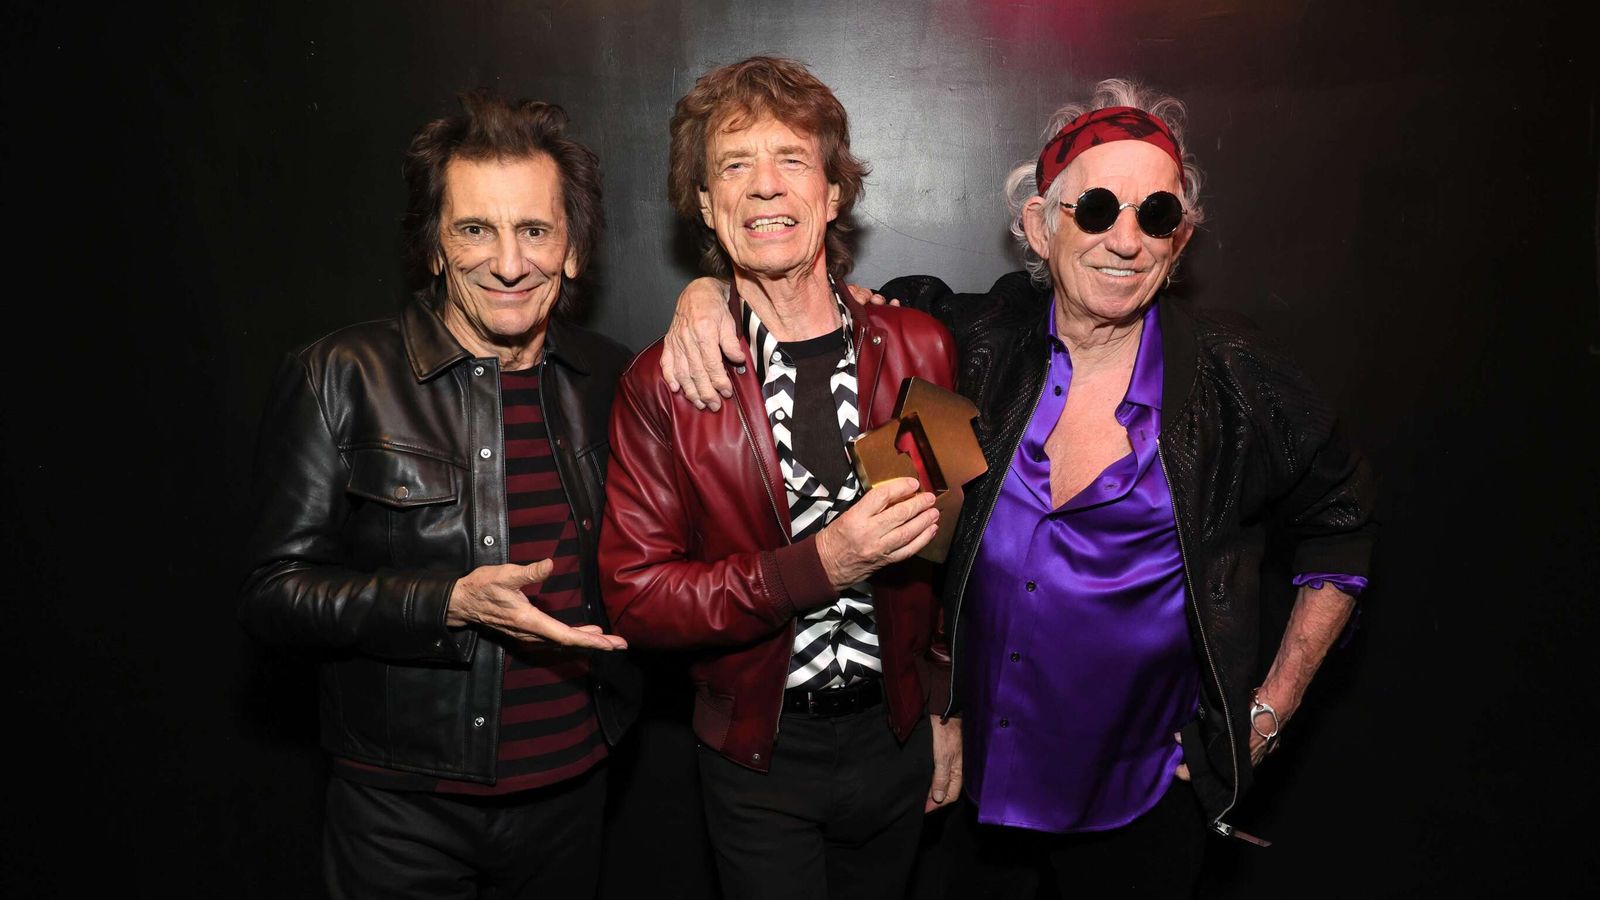 Rolling Stones album goes to number one - drawing level for record with The Beatles and Springsteen